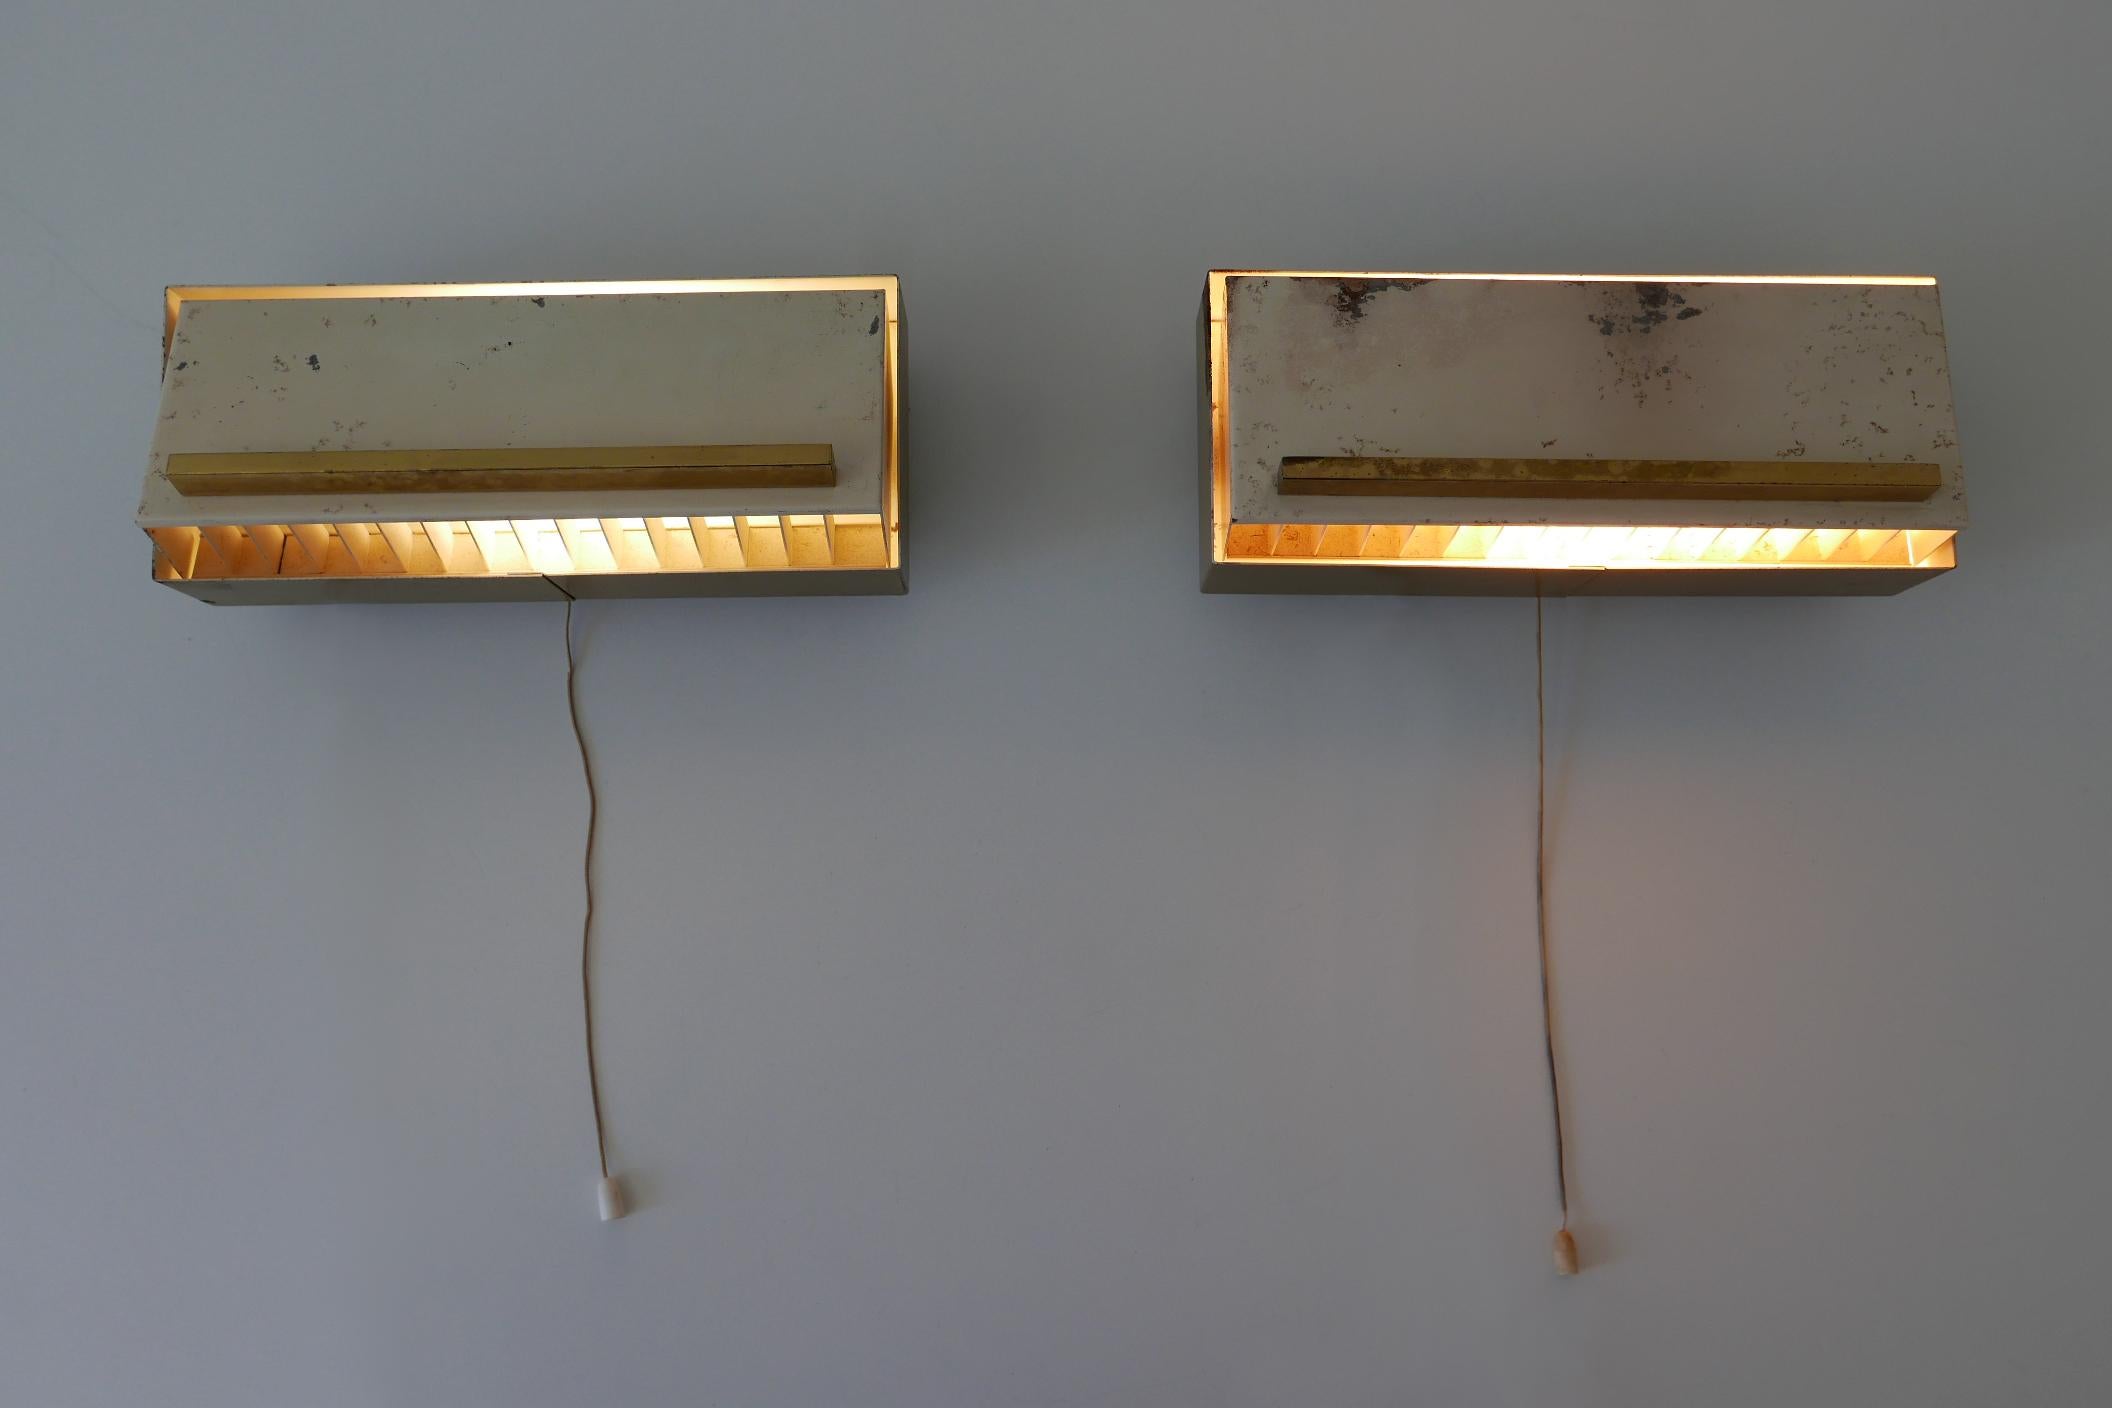 Set of two rare and elegant Mid-Century Modern bedside sconces or wall lamps with adjustable shades. Designed and manufactured by Paul Neuhaus Leuchten, Germany, 1950s.

Executed in brass and enameled metal, each lamp needs 1 x E14 / E12 Edison